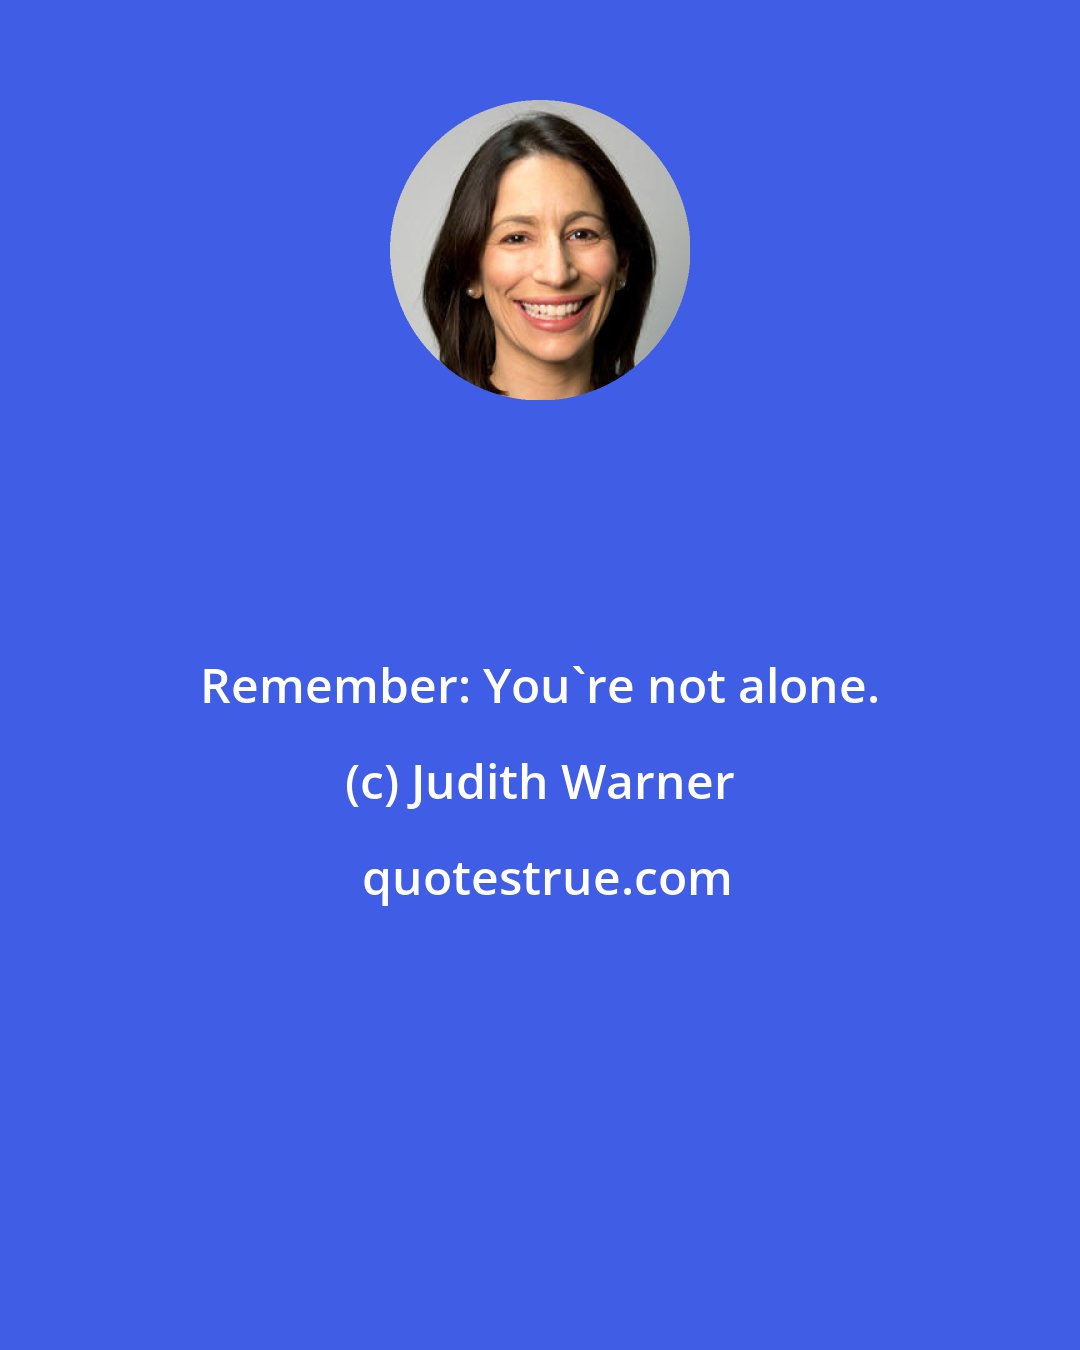 Judith Warner: Remember: You're not alone.